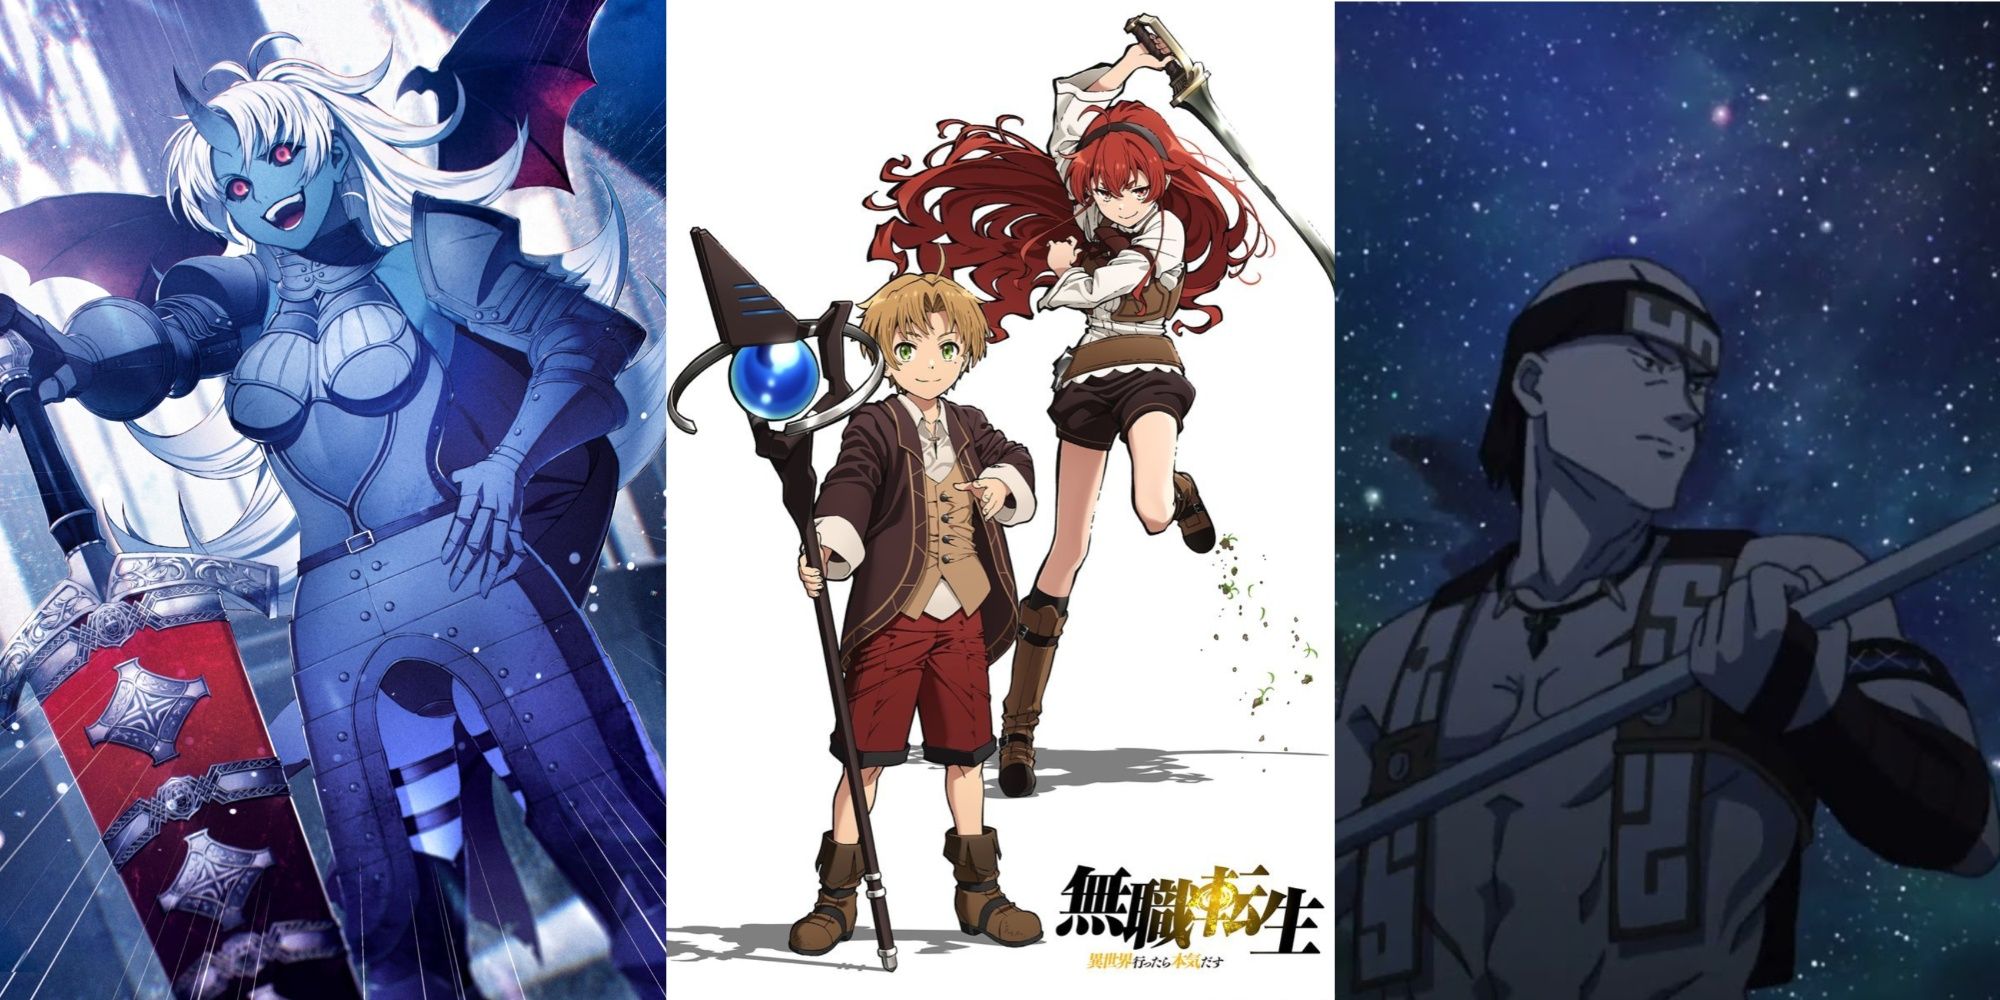 10 Strongest Magic Tools In Mushoku Tensei: Jobless Reincarnation, Ranked featured image